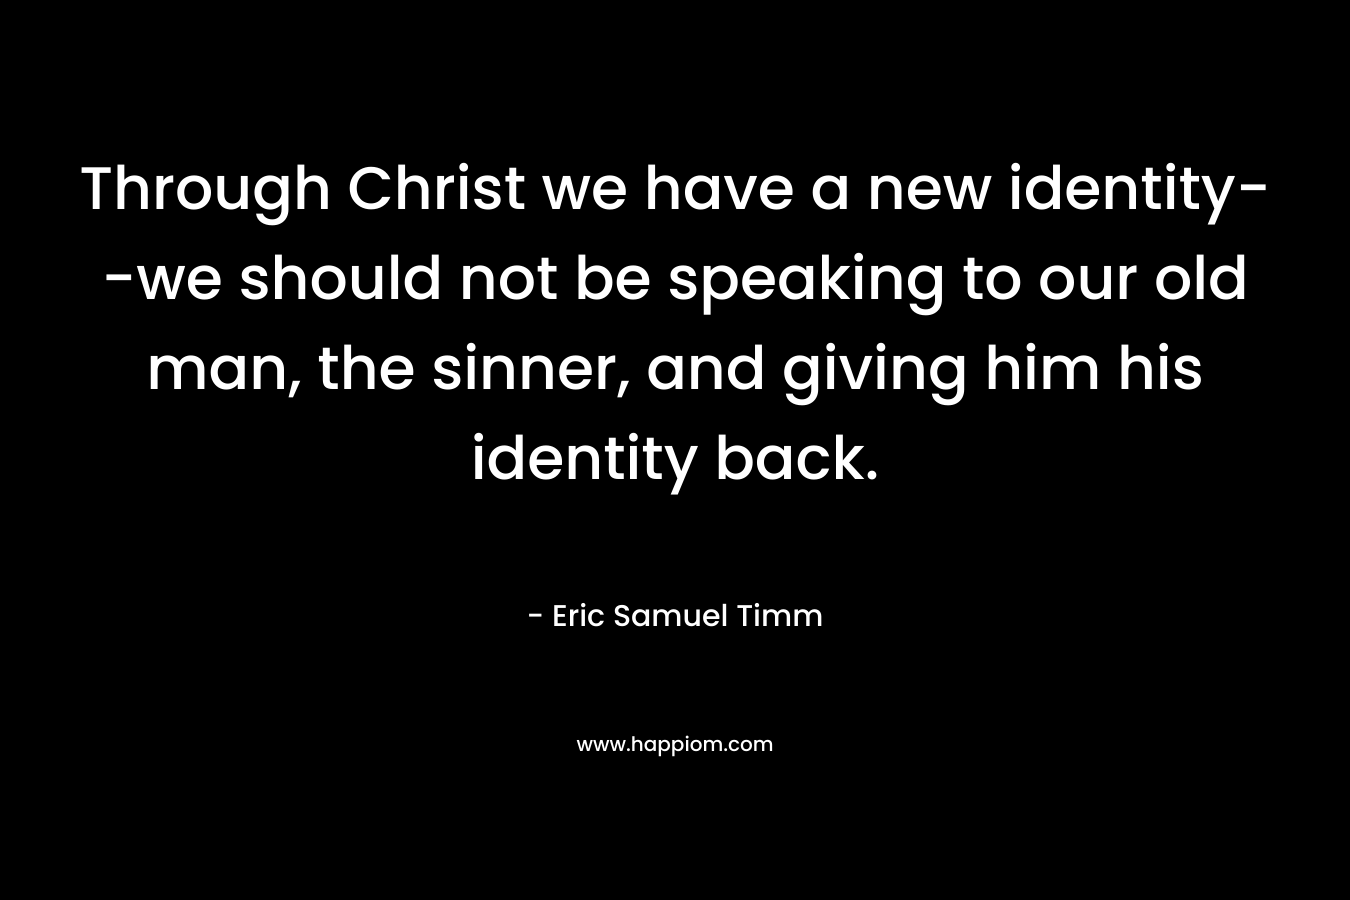 Through Christ we have a new identity--we should not be speaking to our old man, the sinner, and giving him his identity back.